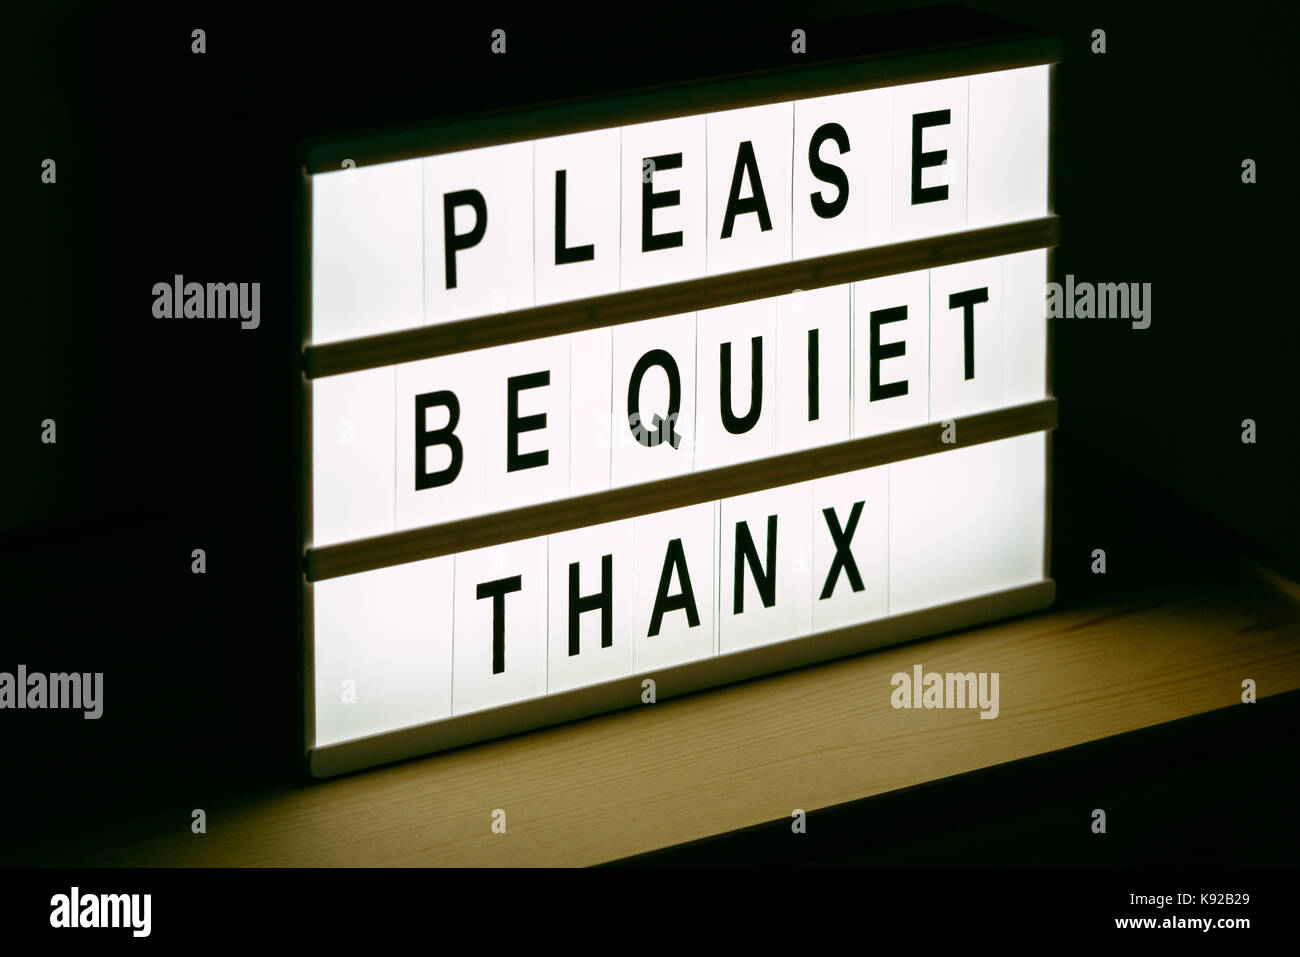 Please be quiet, thanx vintage illuminated message sign in radio or tv studio with live audience Stock Photo